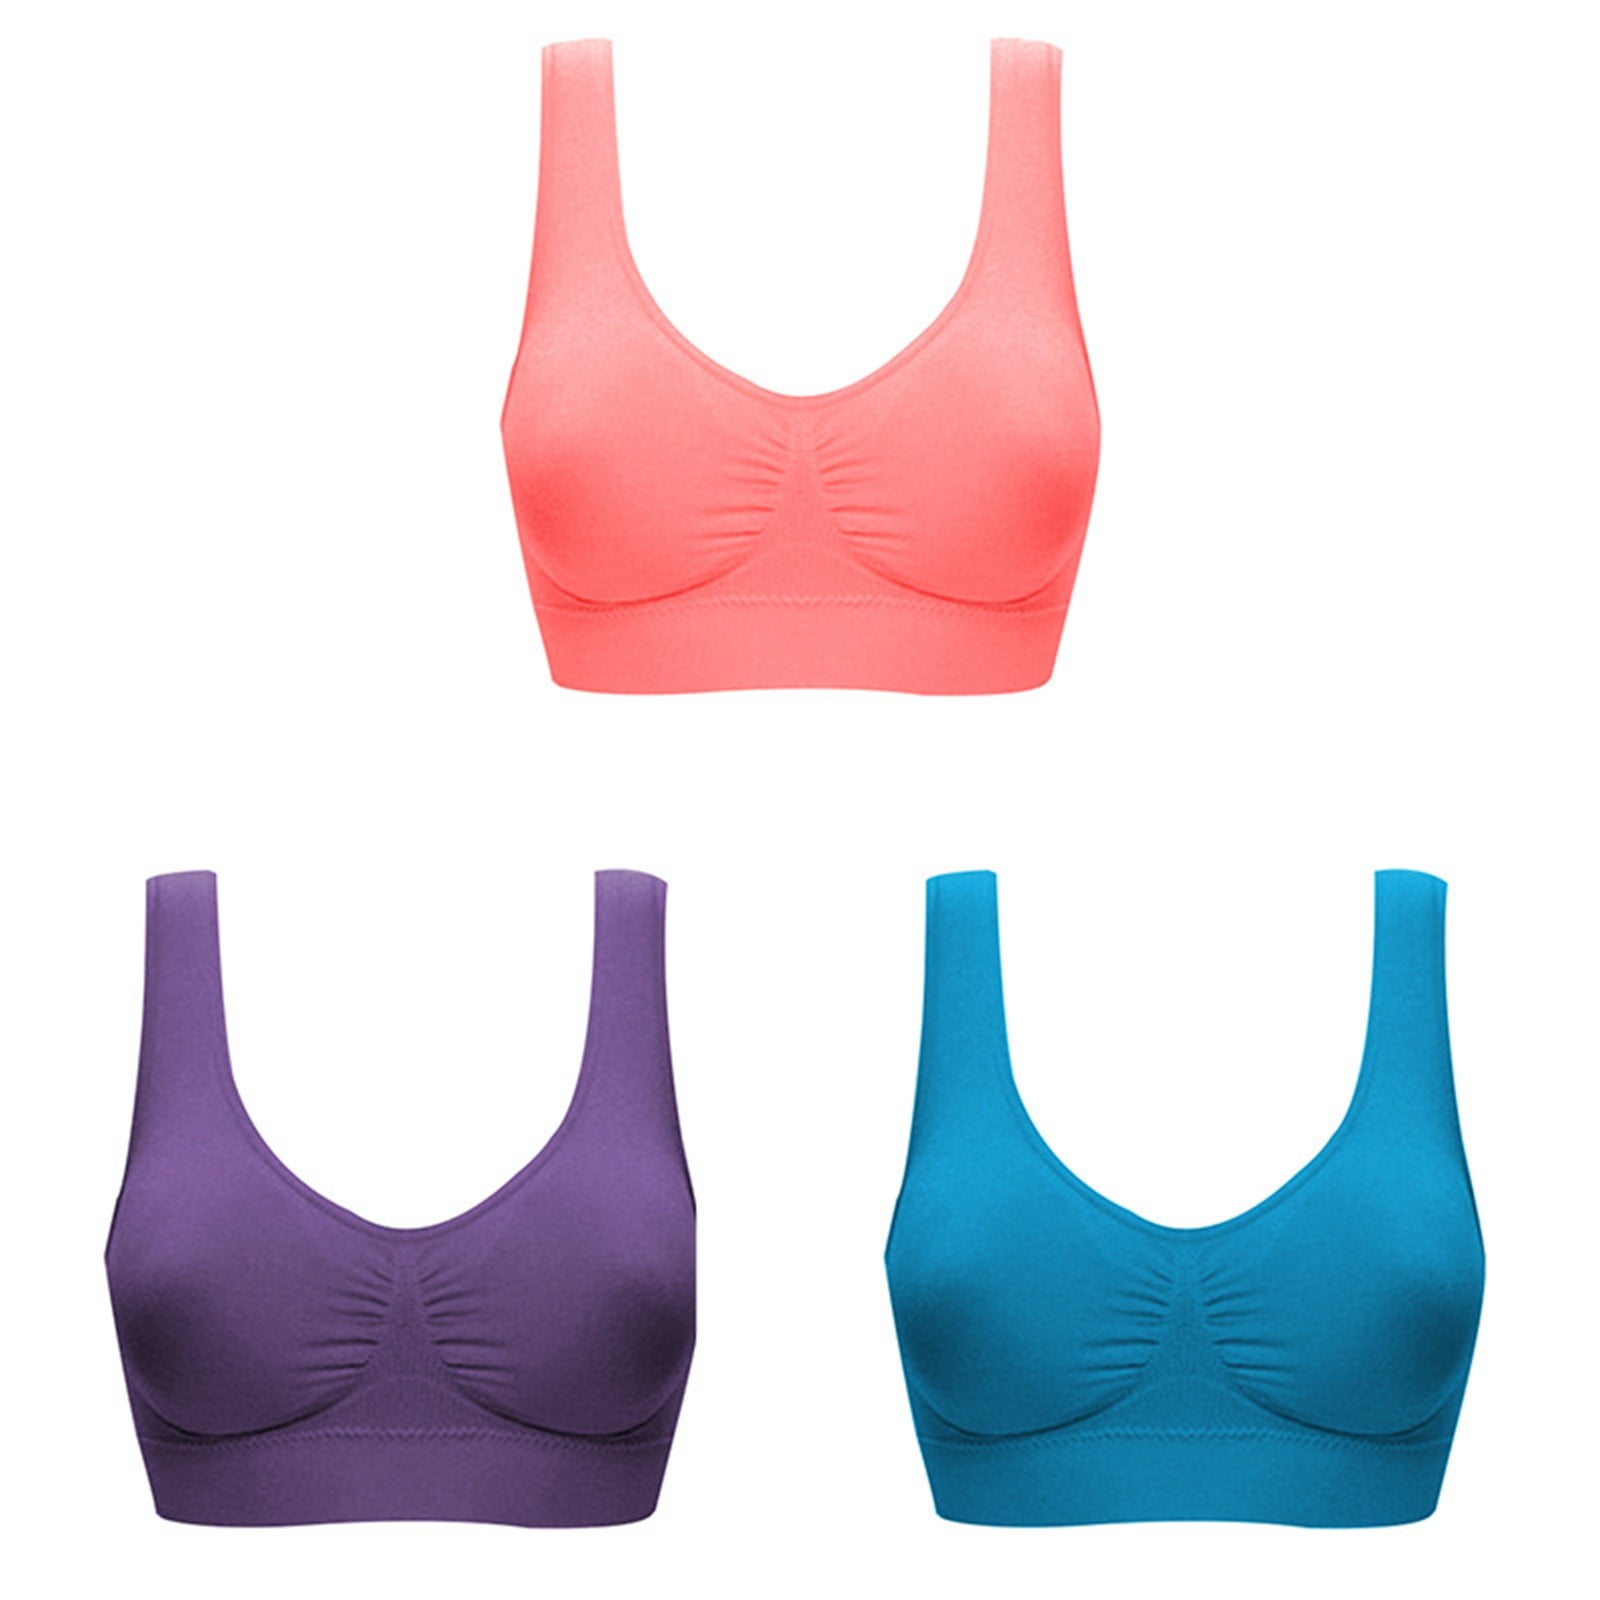 WEANT 3Pack Sticky Bra, Women's Cotton String Cropped Bralette Pack,  Breathable Pullover Bra Crop Top (3Pack:Multicolor Ju, 3X-Large)